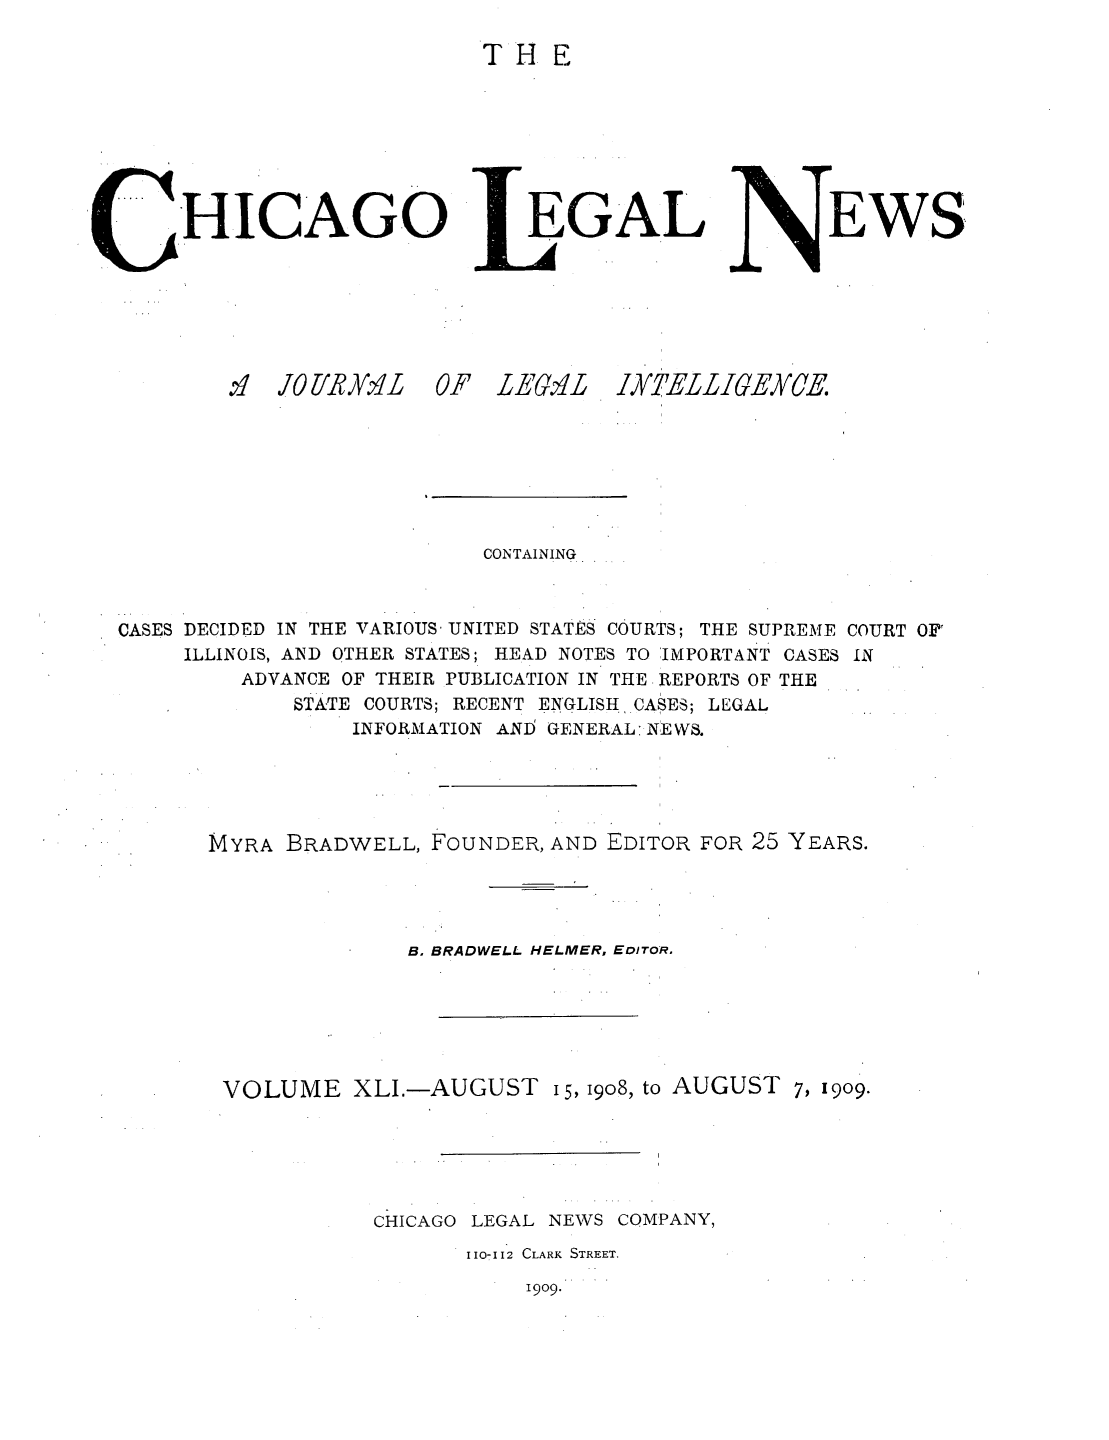 handle is hein.journals/chiclene41 and id is 1 raw text is: TH EHICAGO.  0 /YIiXZ1LOF ZLEG&'LGALEWSIYTELLIGECE.CONTAINING*CASES DECIDED IN THE VARIOUS- UNITED STATES COURTS; THE SUPREME COURT OF'ILLINOIS, AND OTHER STATES; HEAD NOTES TO IMPORTANT CASES INADVANCE OF THEIR PUBLICATION IN THE REPORTS OF THESTATE COURTS; RECENT ENGLISH CASES; LEGALINFORMATION ANI GENERAL:NEWS.MYRA BRADWELL, FOUNDER, AND EDITOR FOR 25 YEARS.B. BRADWELL HELMER, EDITOR,VOLUME XLI.-AUGUST 15, I908, to AUGUST 7, 19o9.CHICAGO LEGAL NEWS COMPANY,1107112 CLARK STREET.1909.